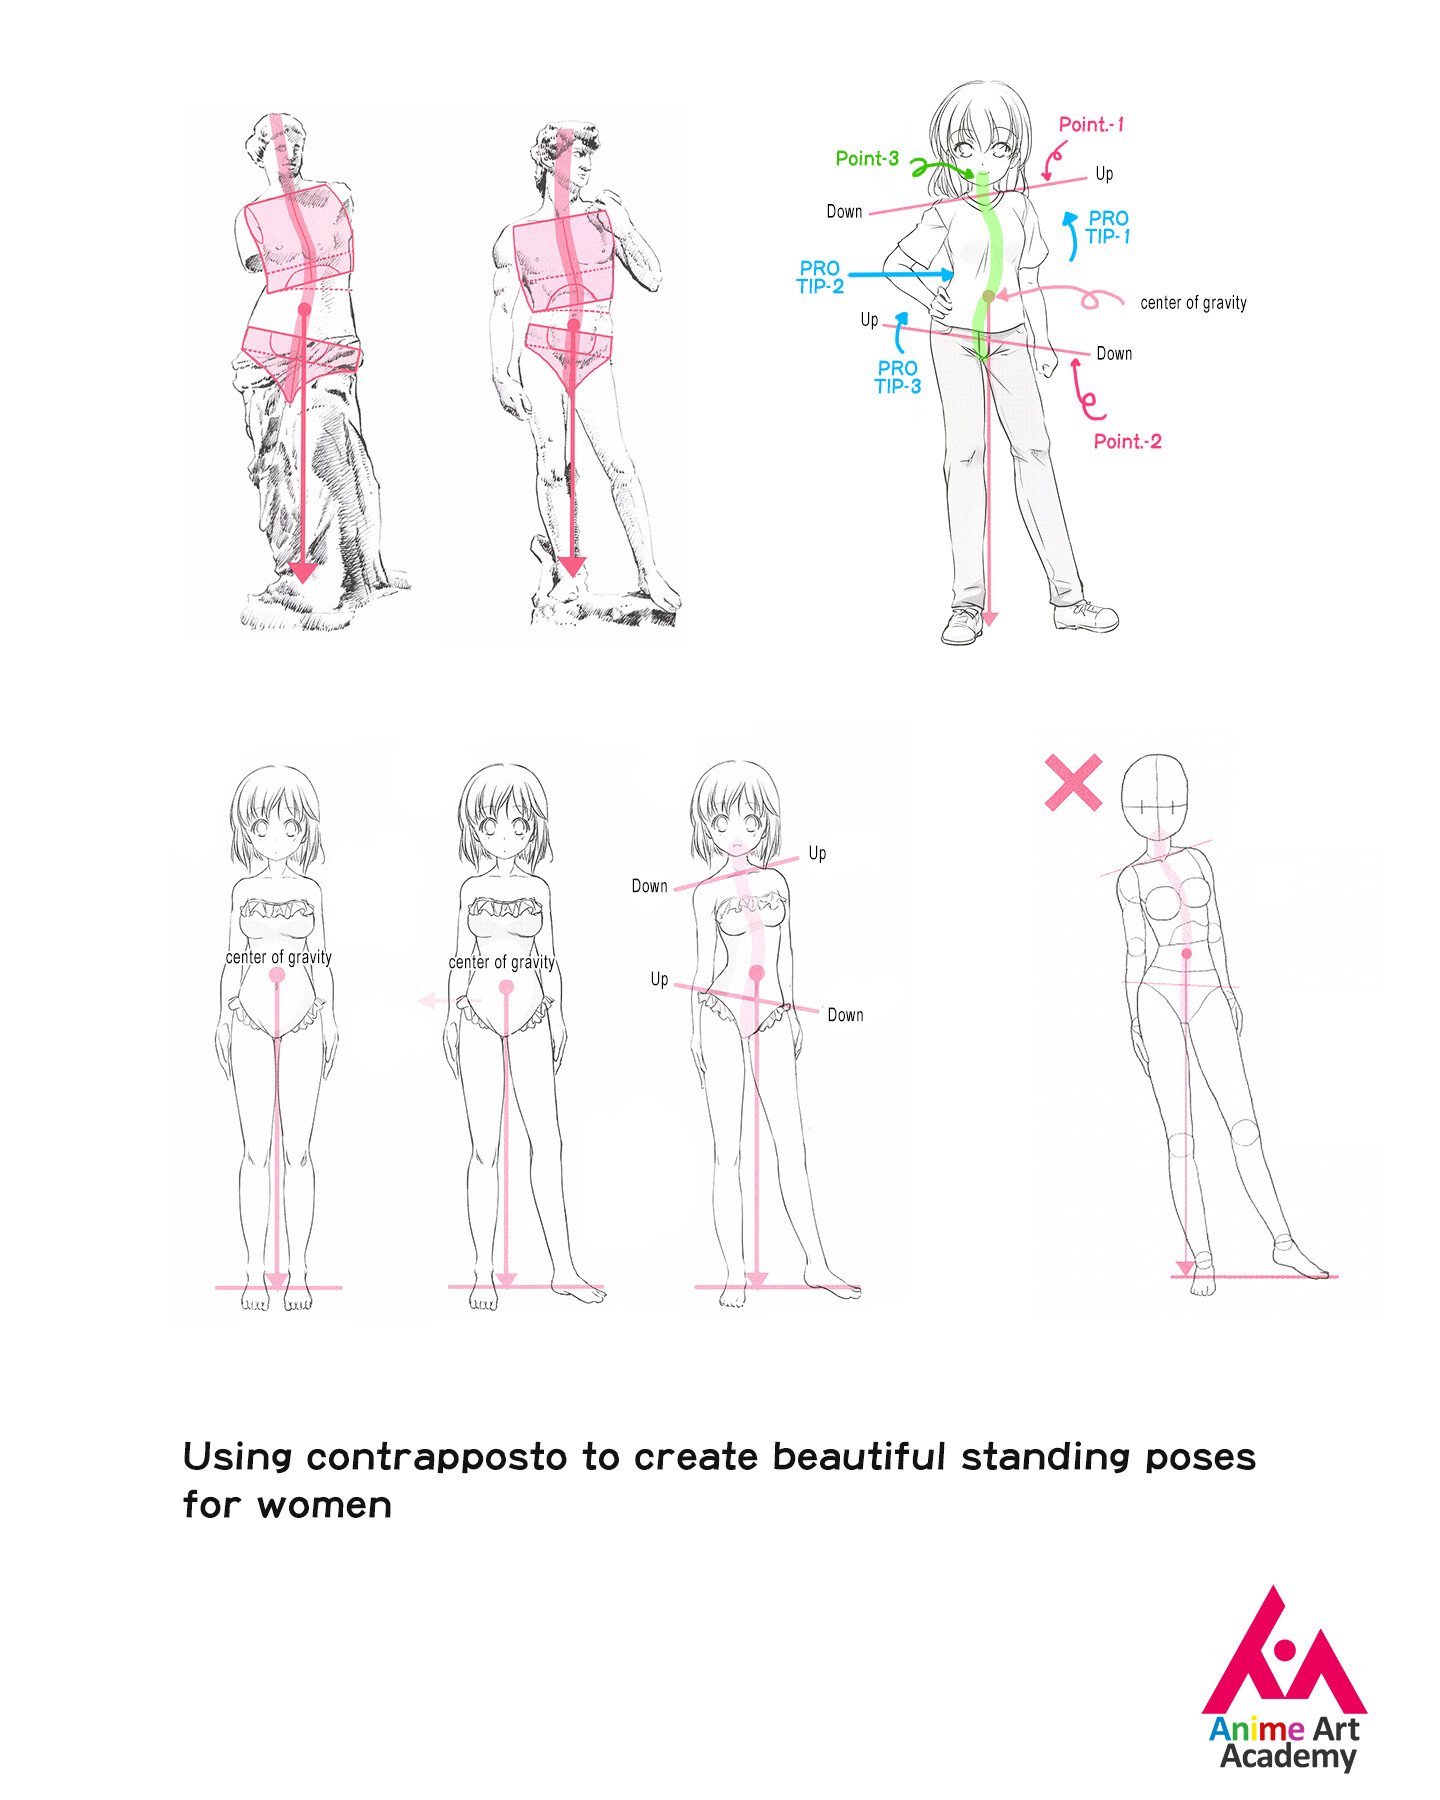 ArtStation - Using contrapposto to create beautiful standing poses for women